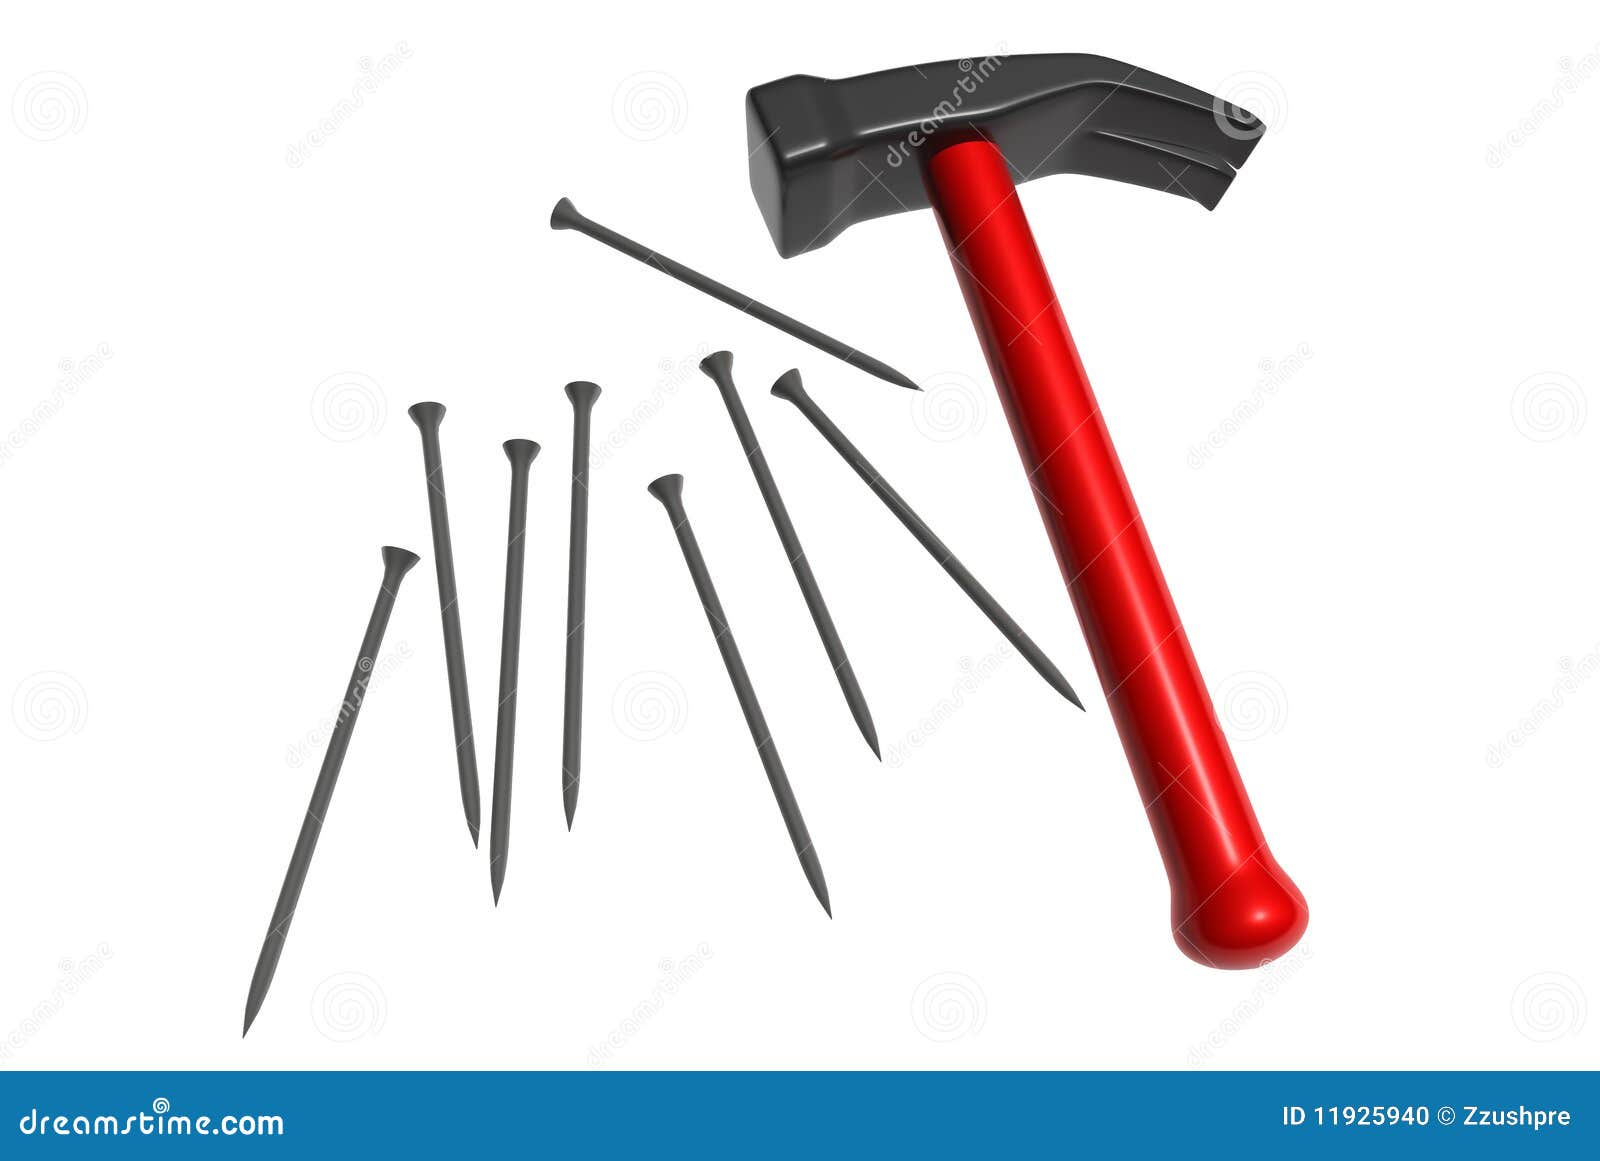 hammer and nails clipart - photo #28